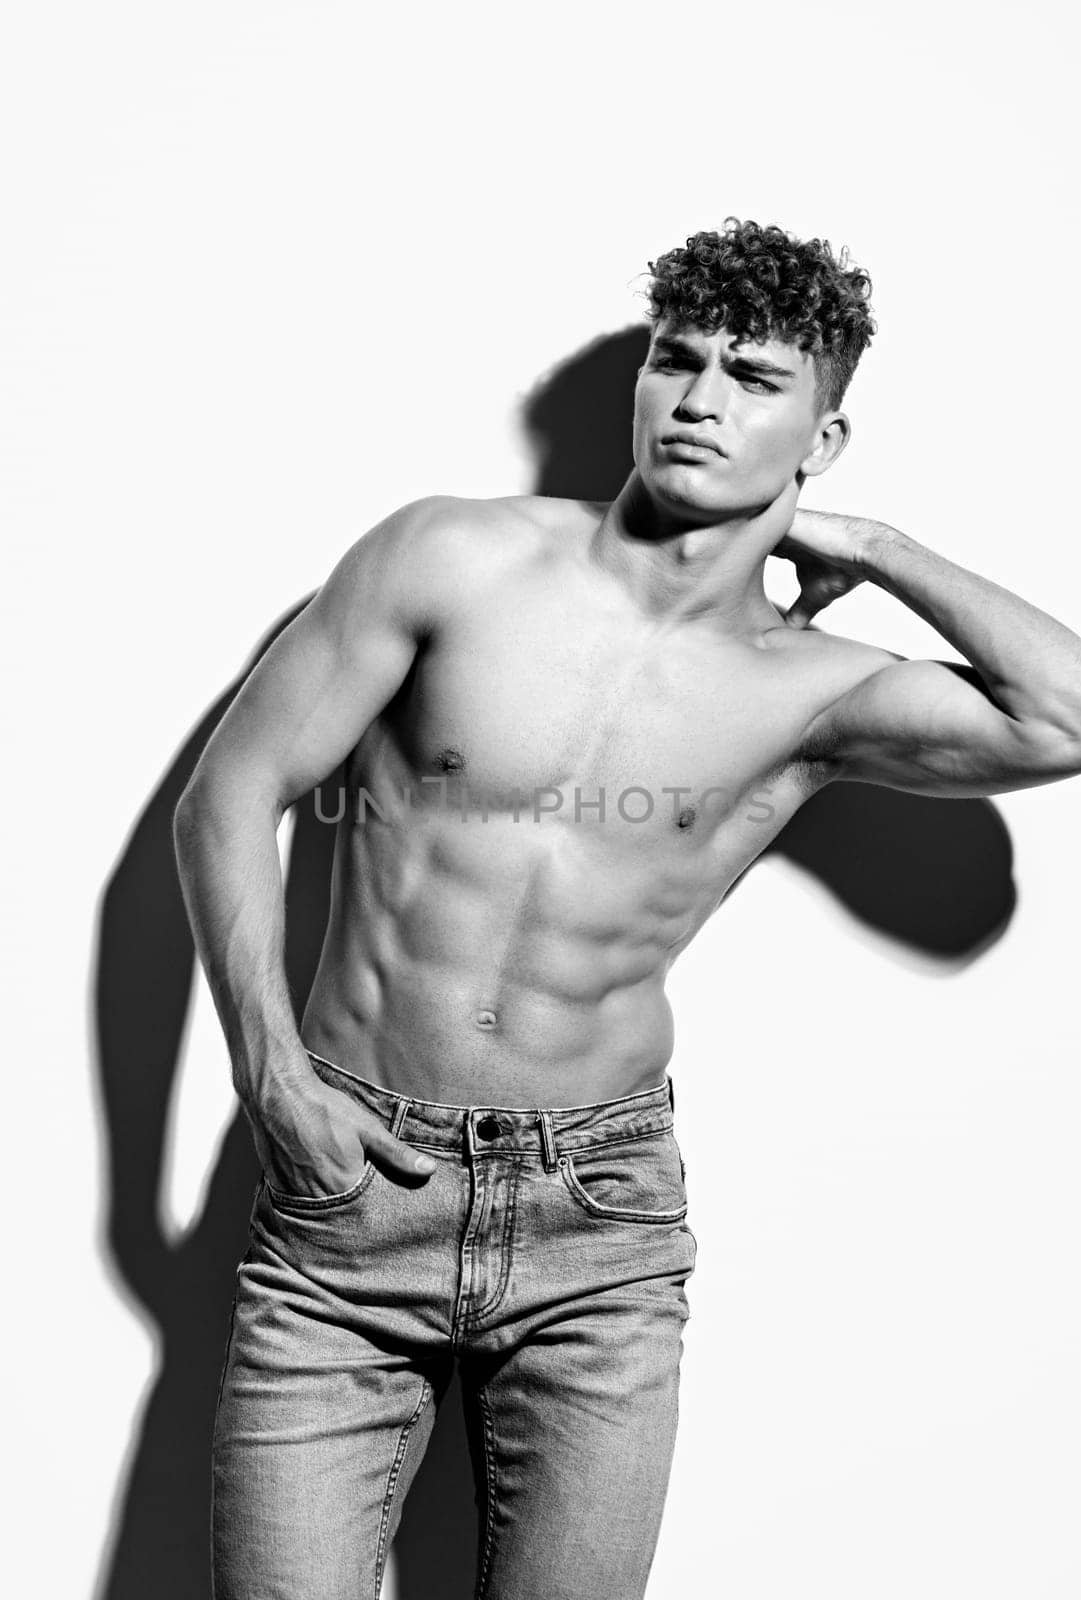 man black athlete adult strong naked sport fashion fitness beautiful muscular athletic body sexy trend male attractive